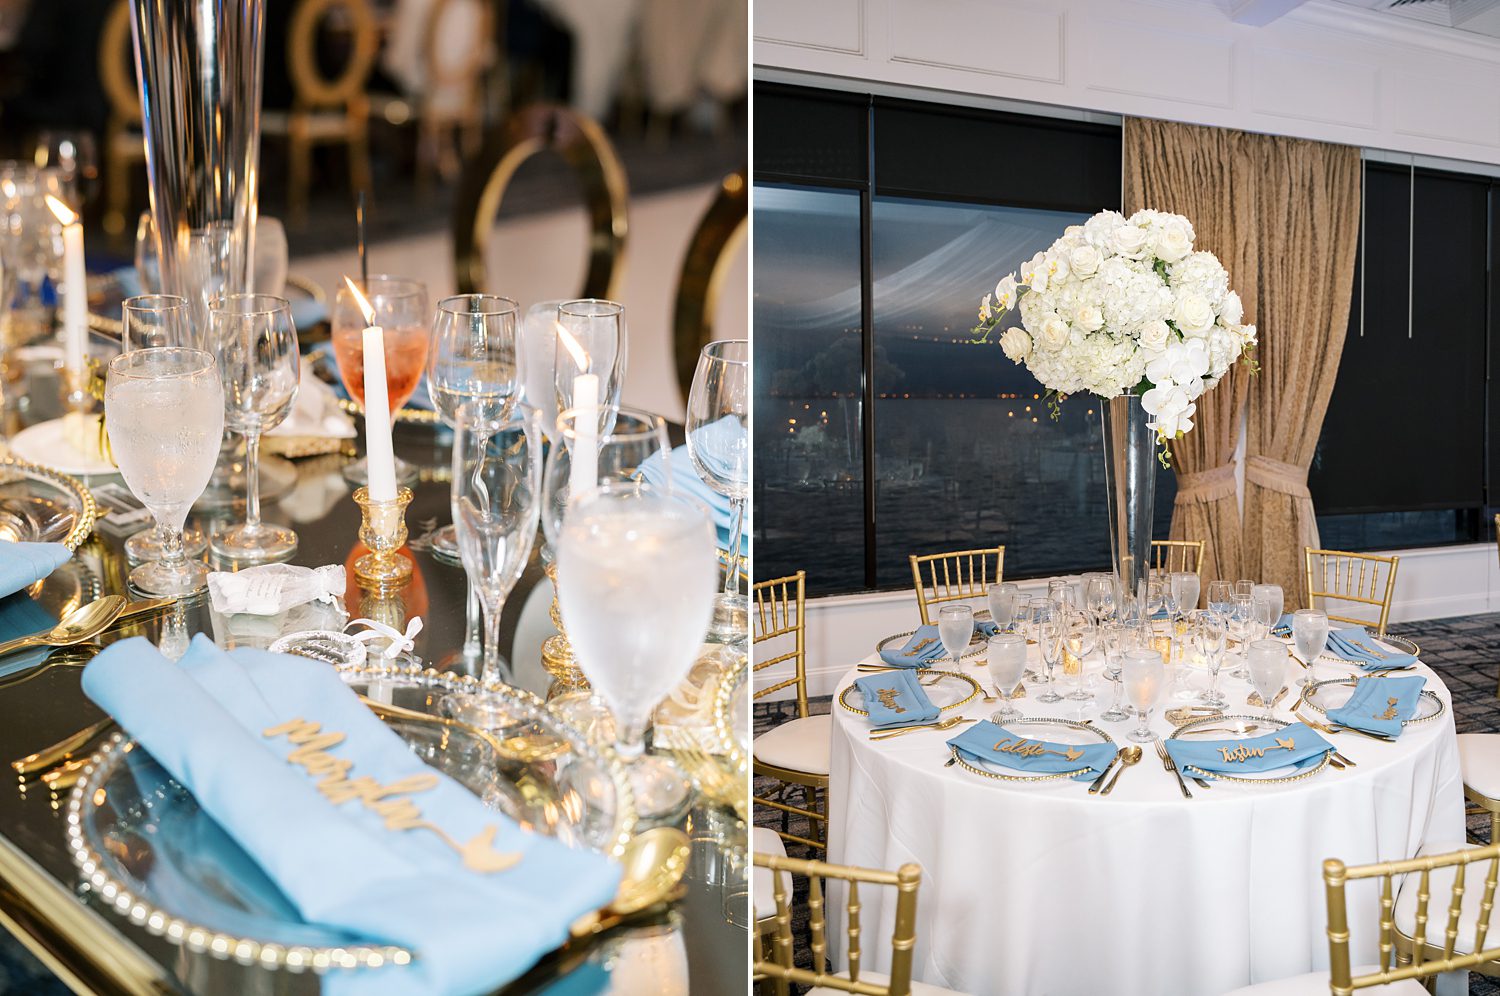 place settings for Rusty Pelican Tampa wedding reception with blue napkins and gold plates 